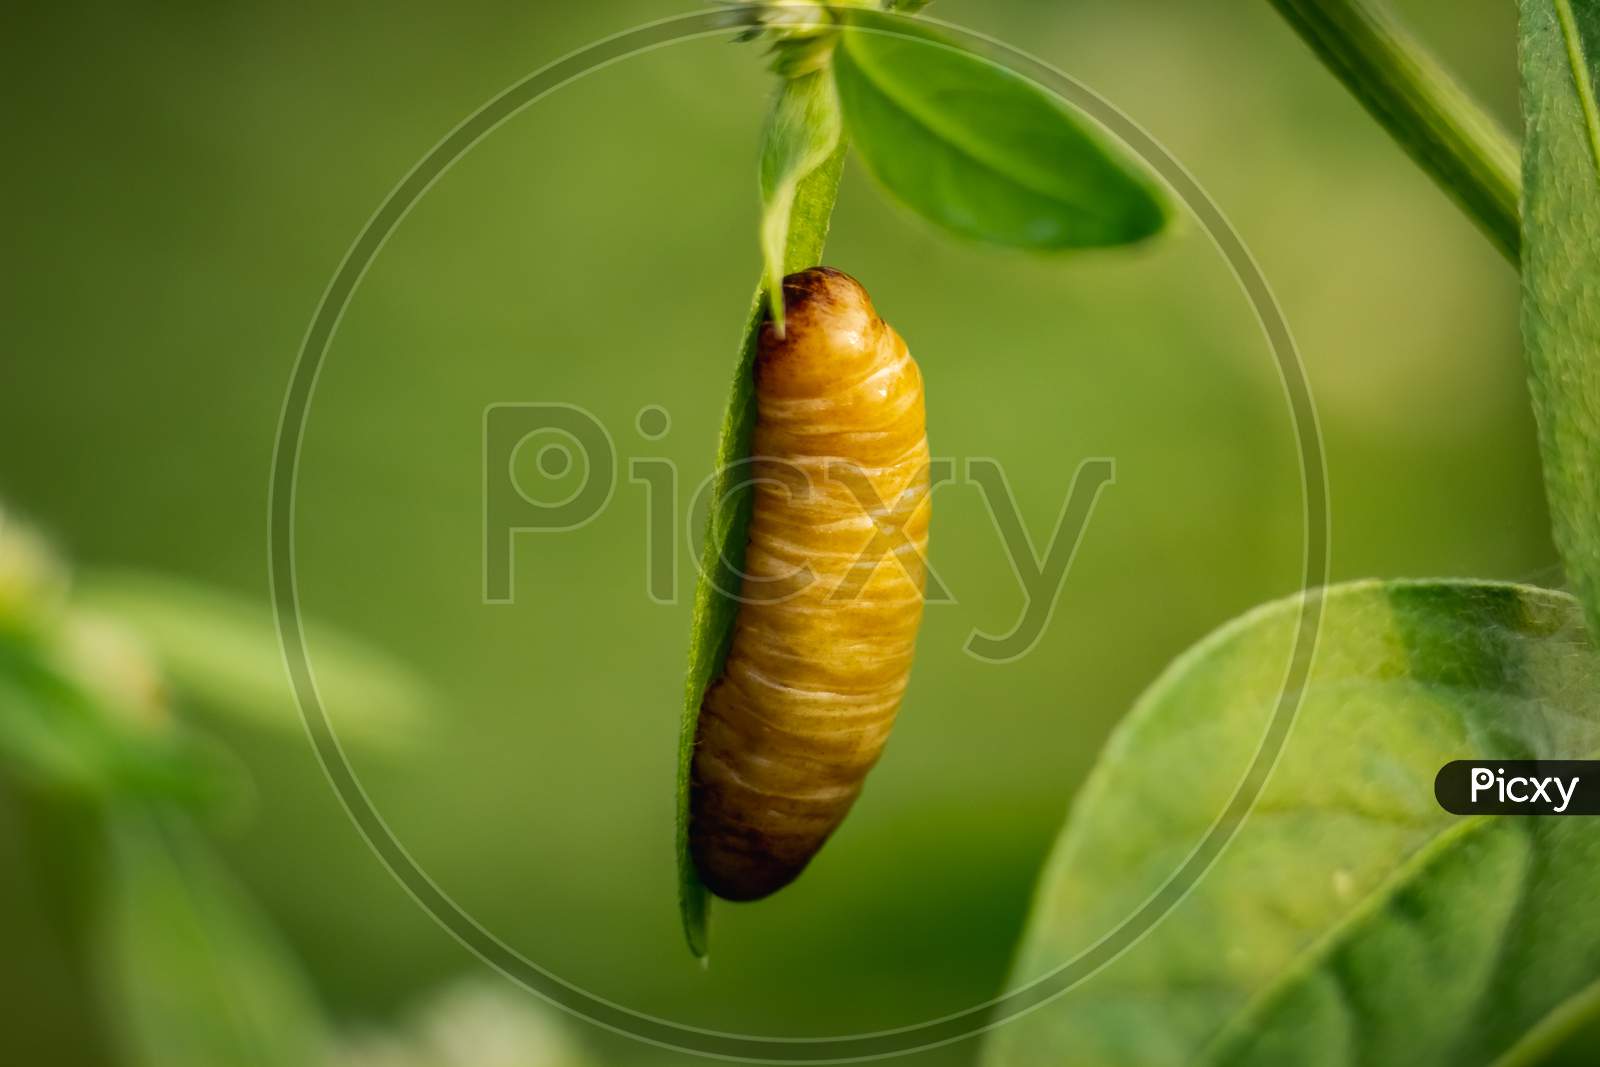 Pupa Butterfly - Big Brown Butterfly Pupa Hanging On The Edge Of The Green Leaf In Forest Isolated On Green Background. Pupae Is A Stage Between Caterpillars And Butterflies.